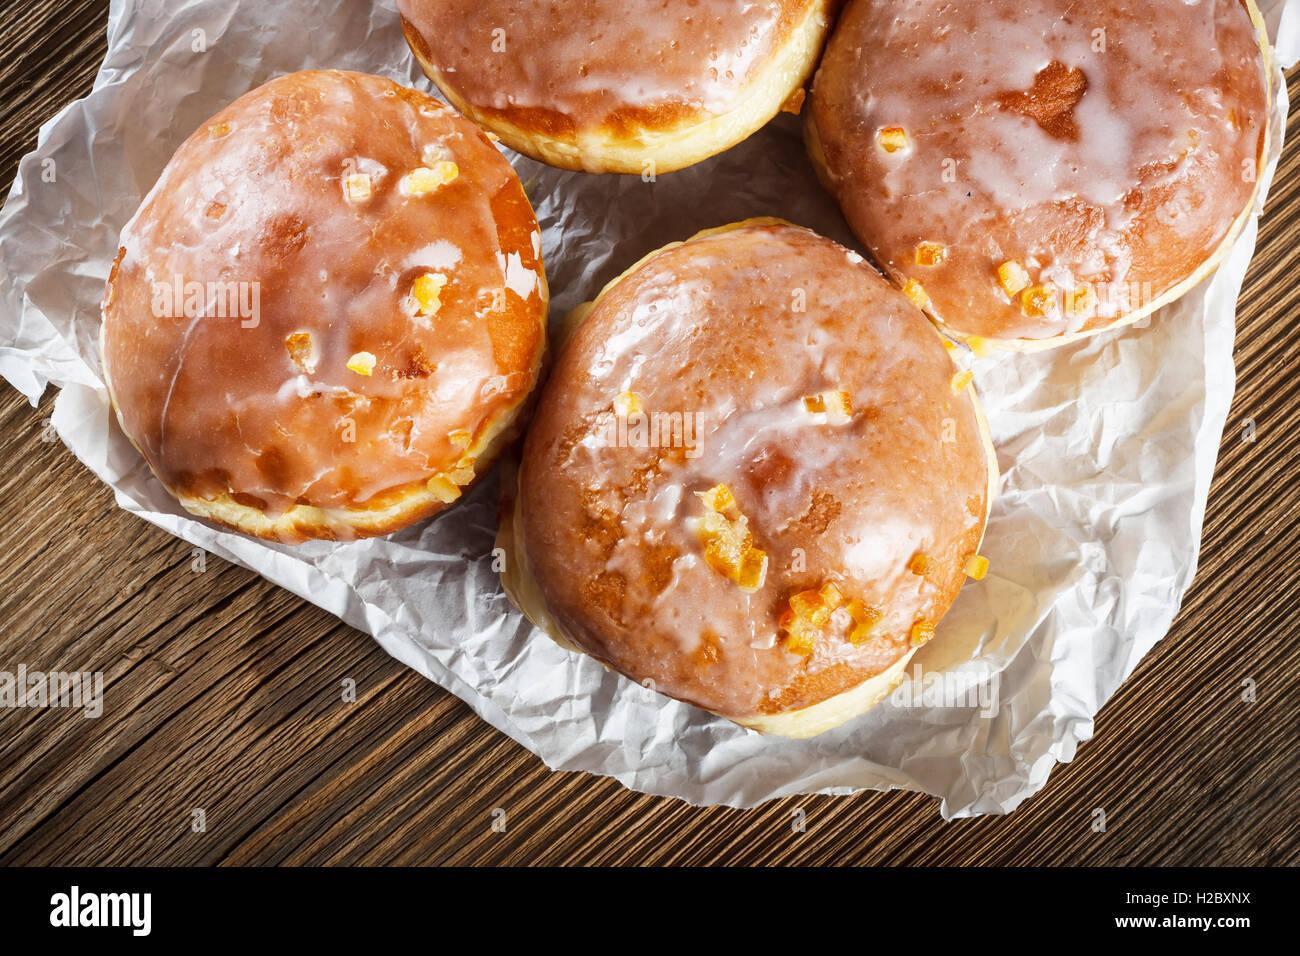 Doughnuts filled with rose marmalade Stock Photo